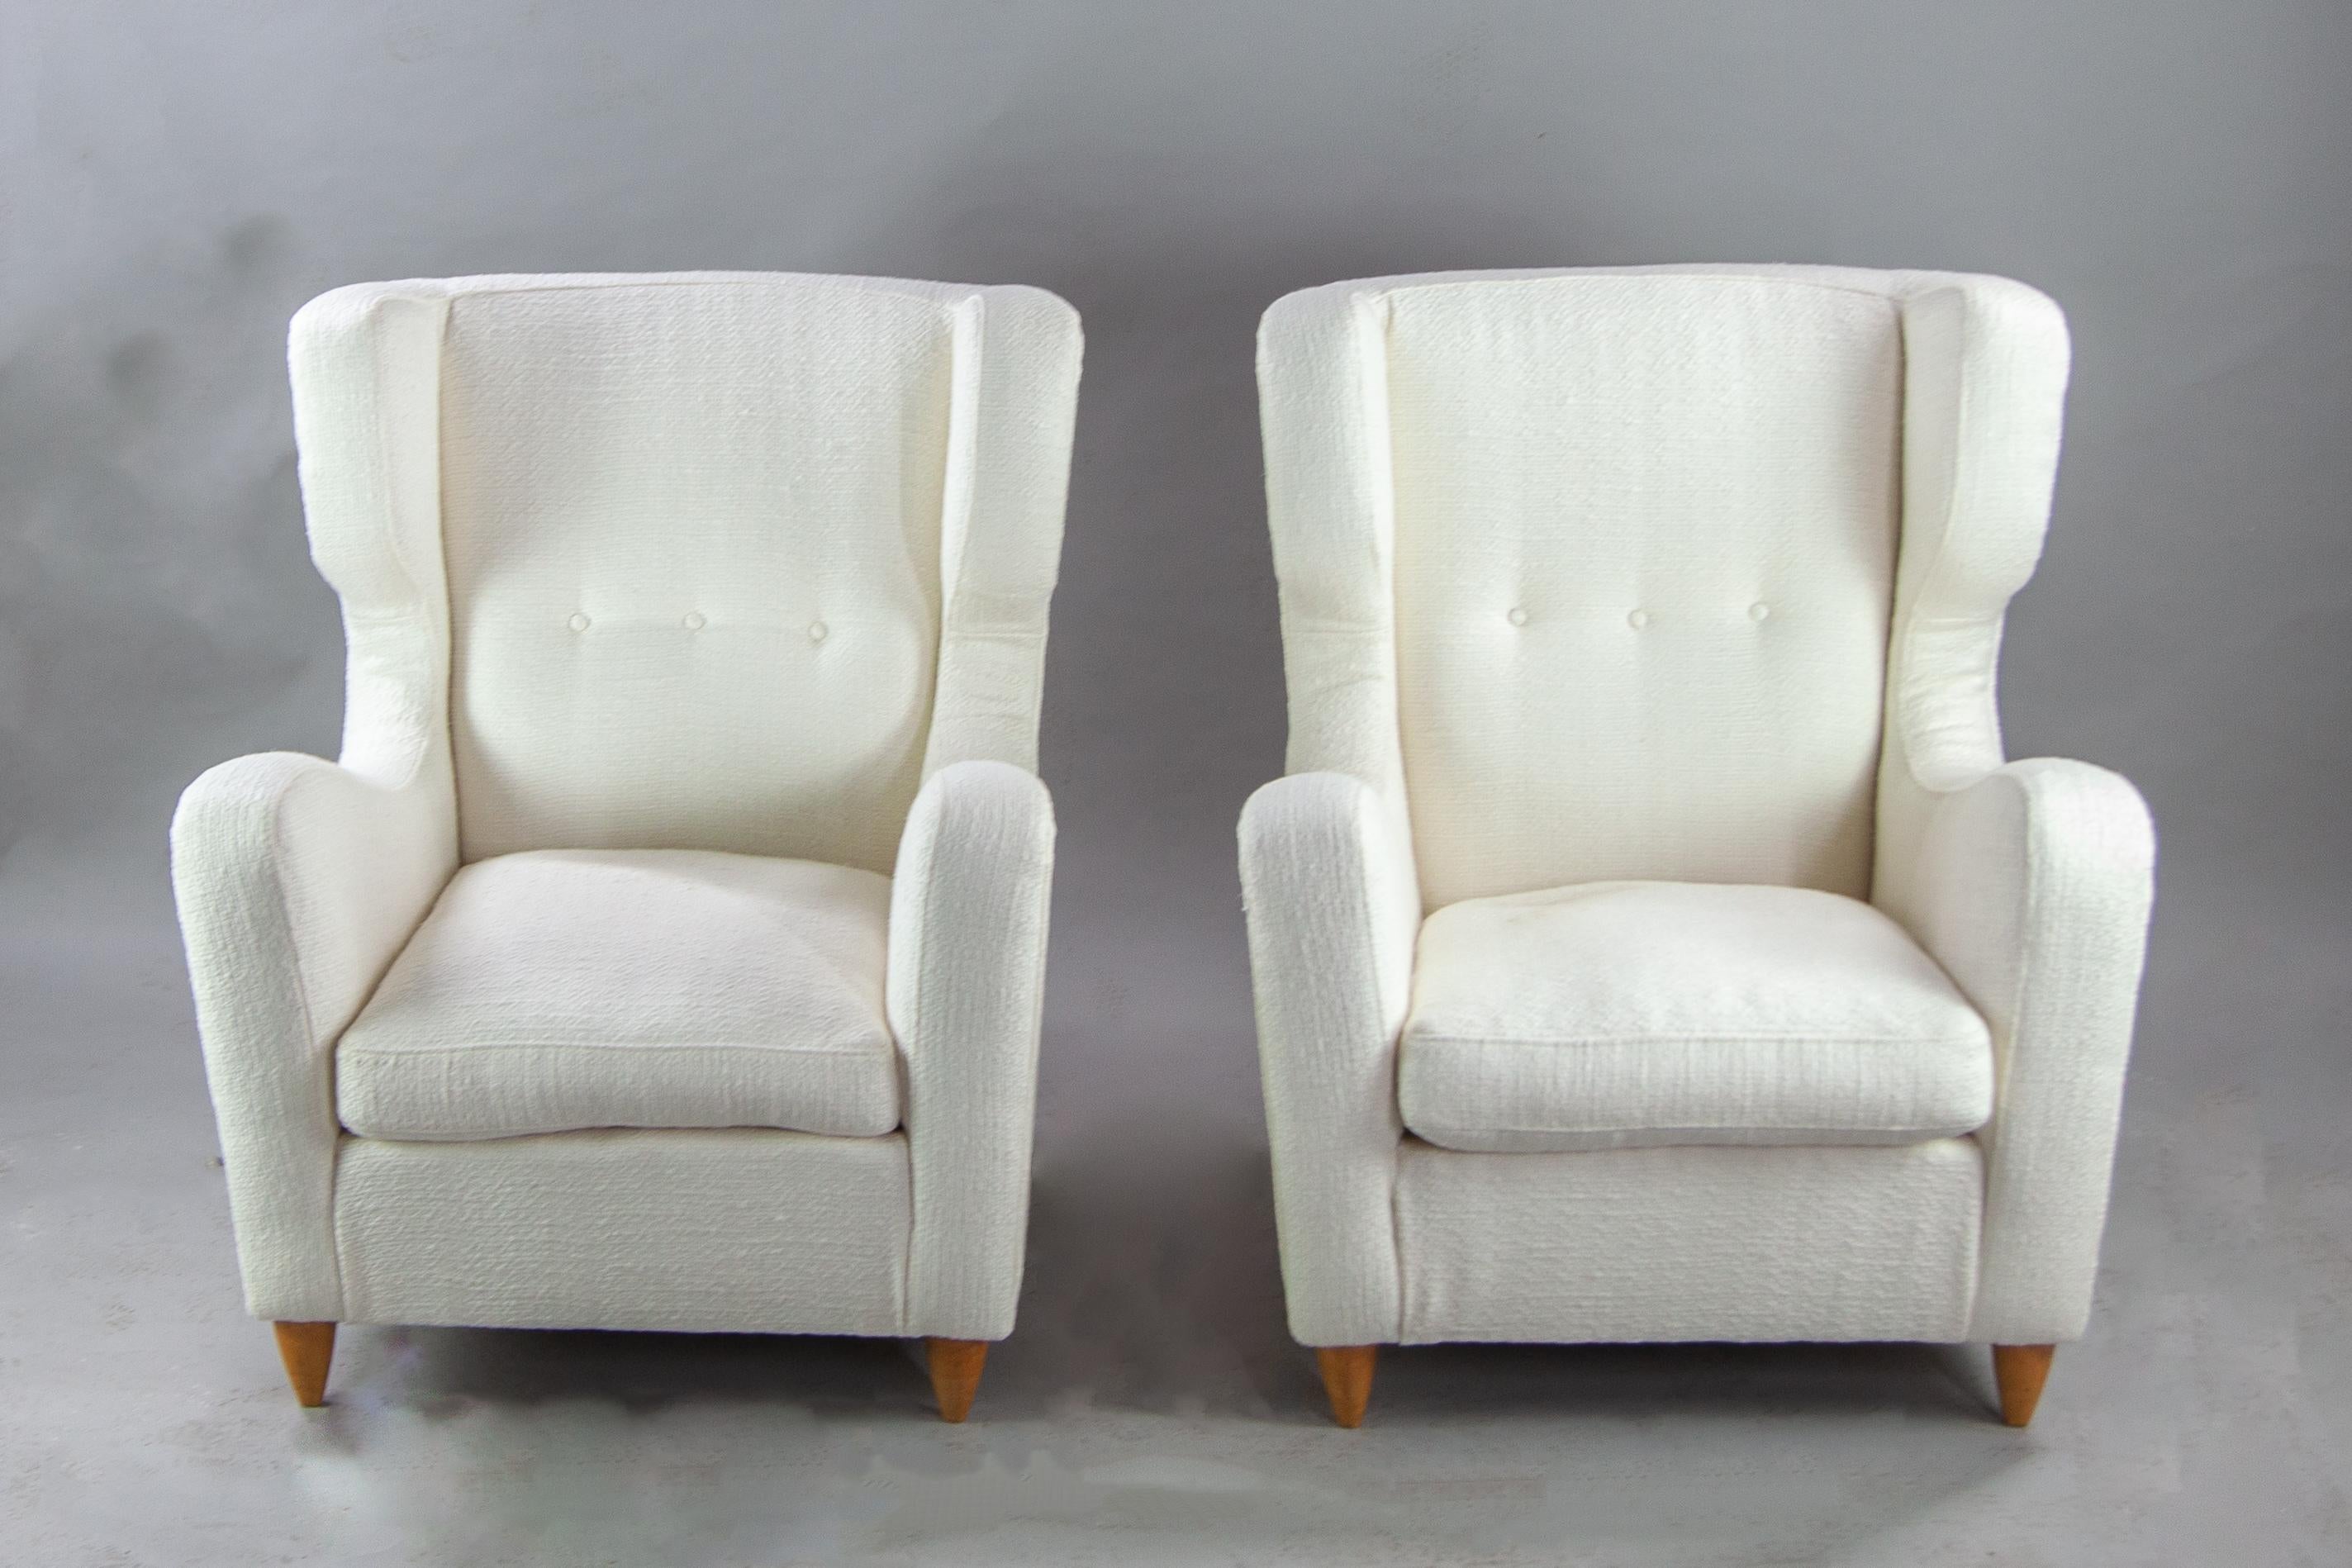 Wingback Chairs by Melchiorre Bega 1940s, Reupholstered in Metaphore Fabric For Sale 3